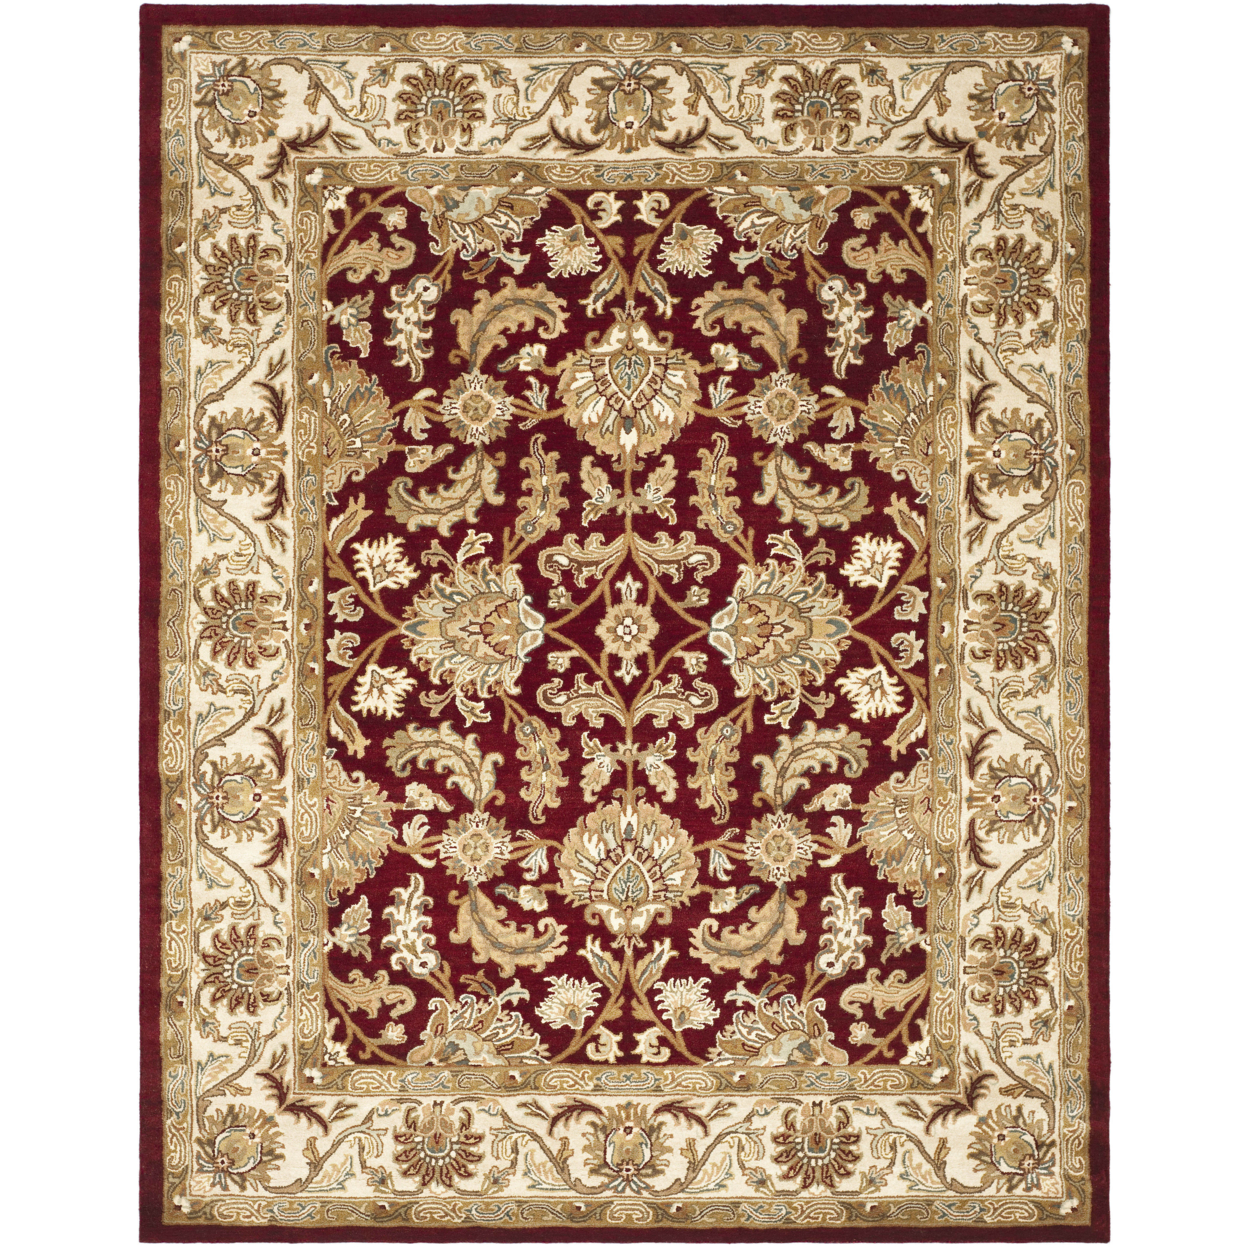 Safavieh HG628D Heritage Red / Ivory - 7' 6 X 9' 6 Oval